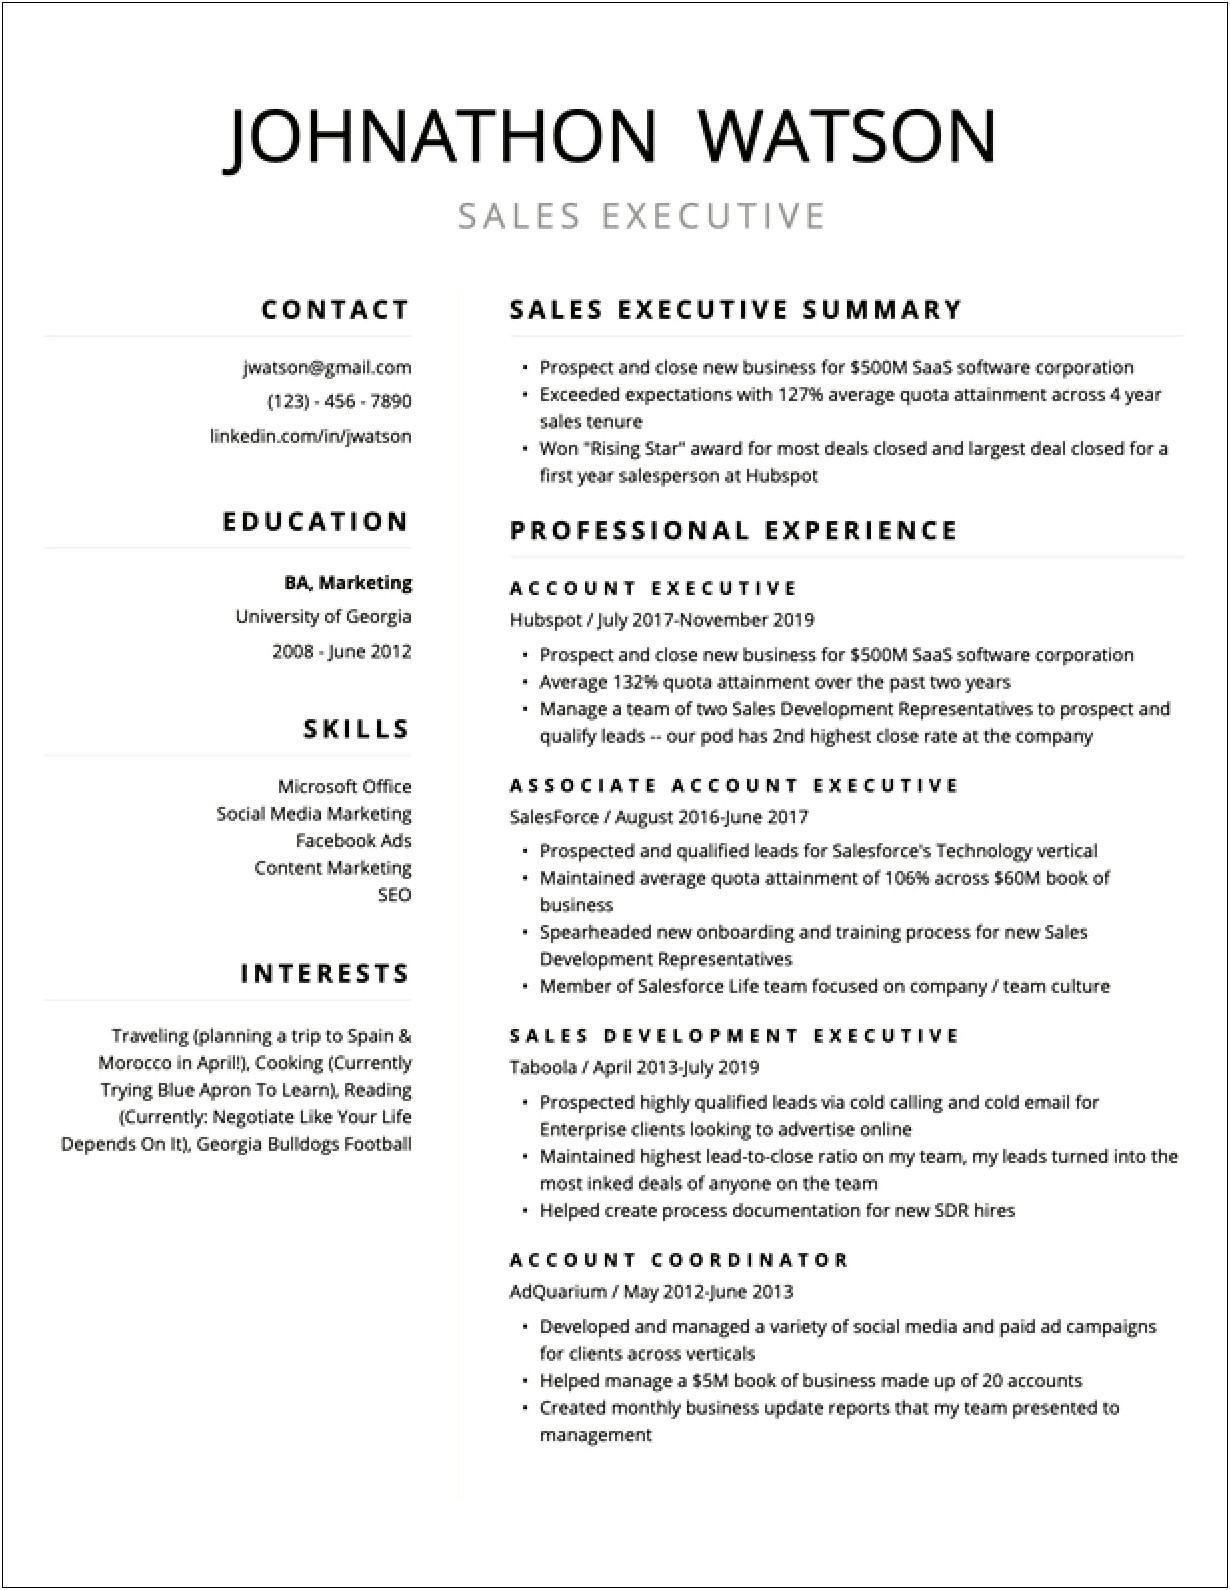 Resume After Not Working For Years